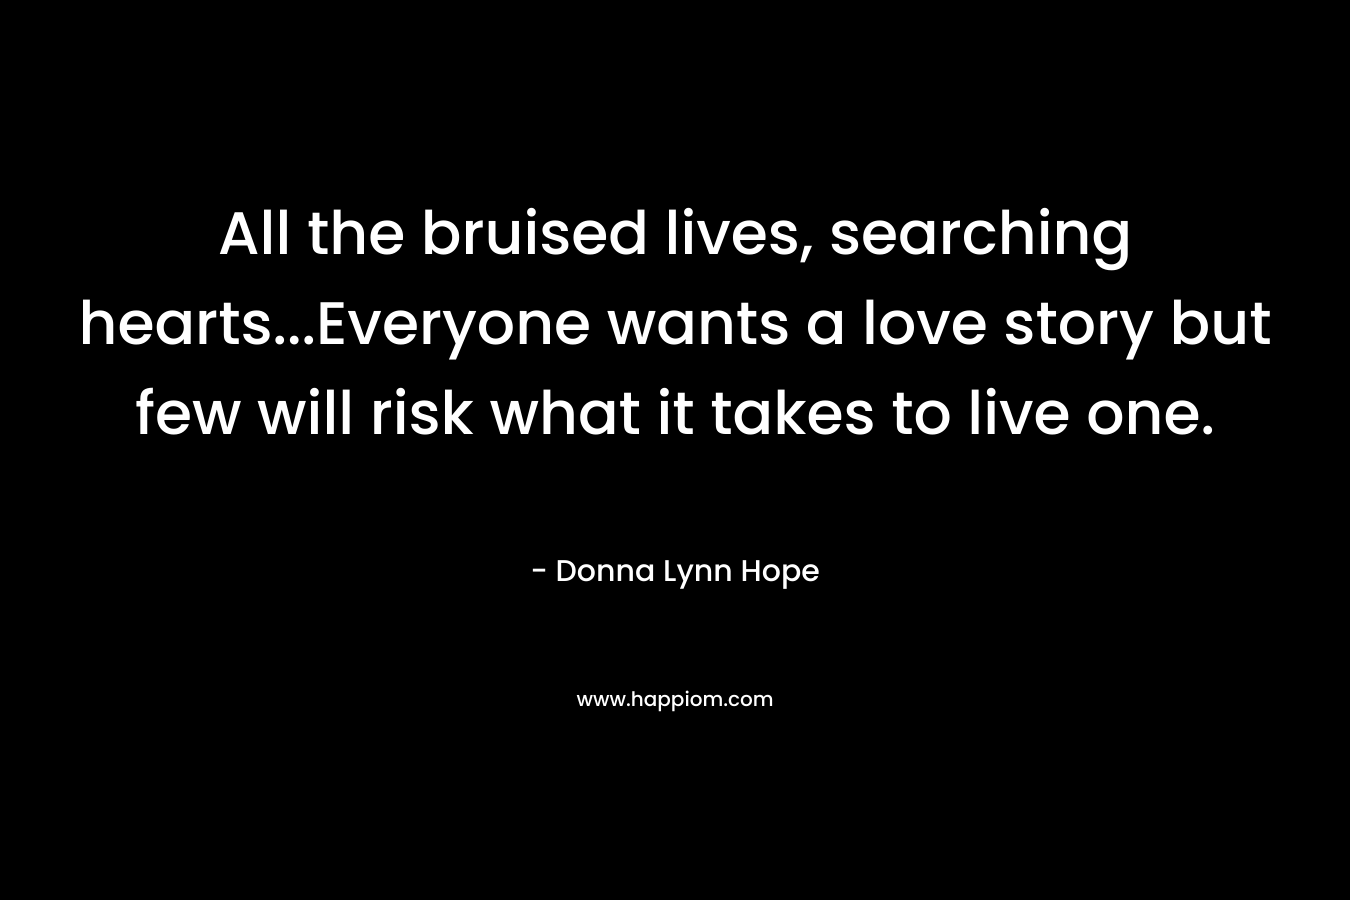 All the bruised lives, searching hearts…Everyone wants a love story but few will risk what it takes to live one. – Donna Lynn Hope